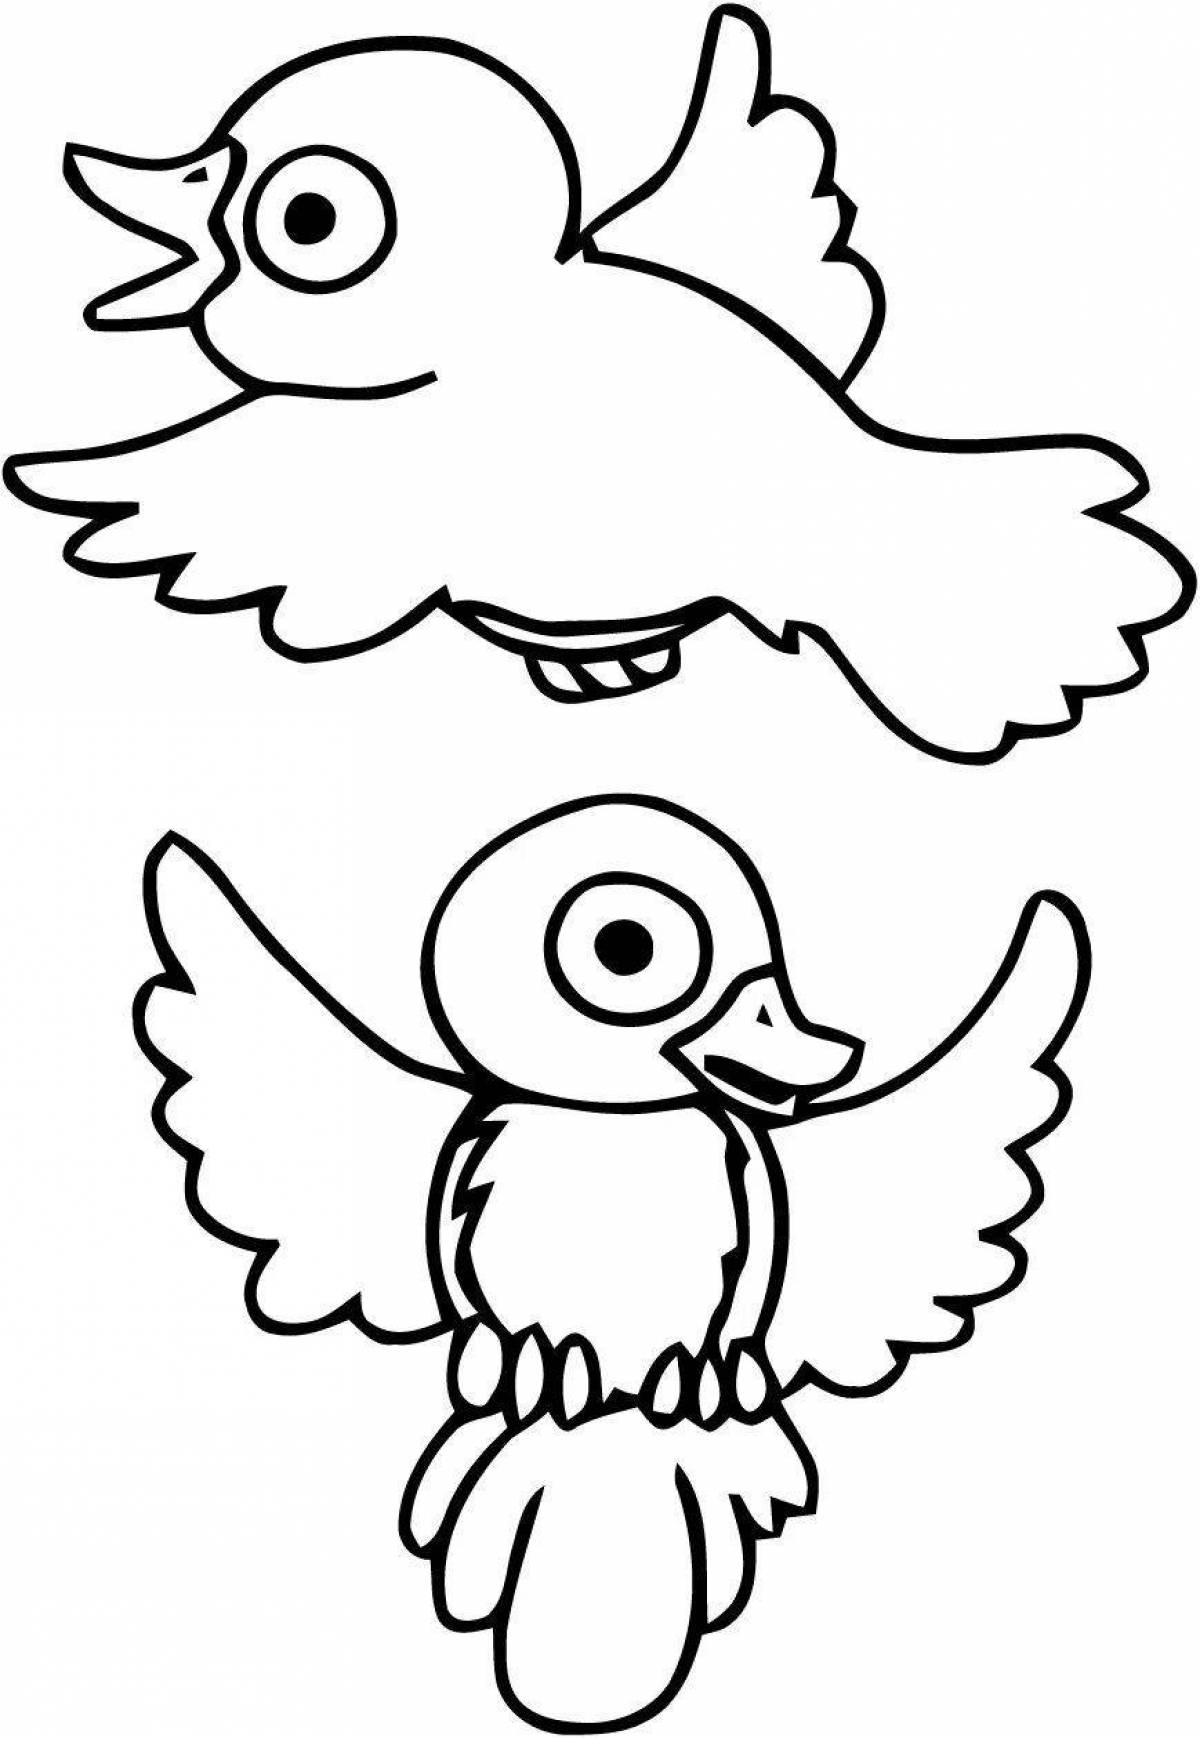 Amazing bird coloring pages for 2-3 year olds